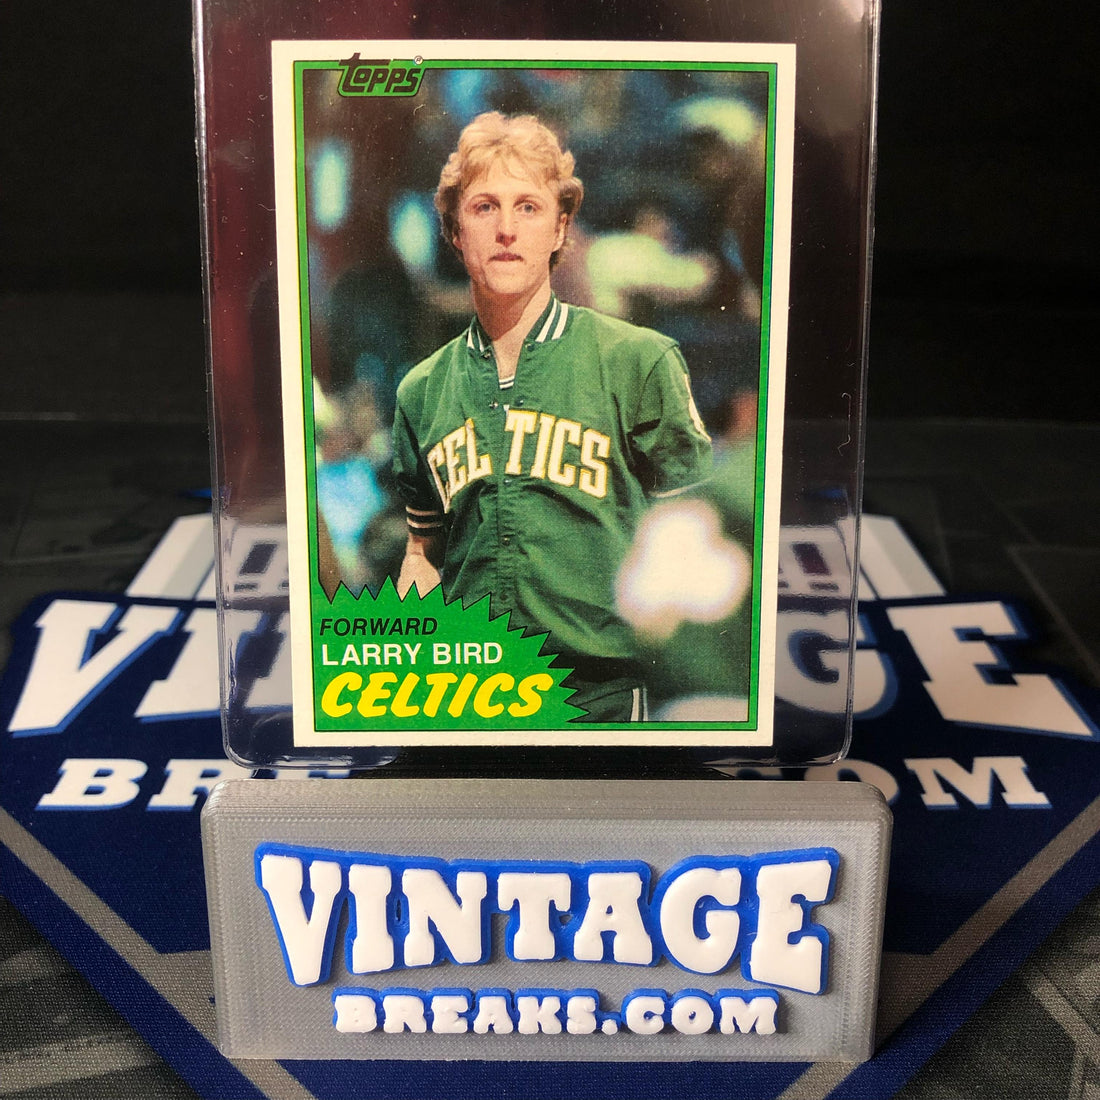 1981 Topps Larry Bird Card Pulled from Wax Pack with Vintage Breaks